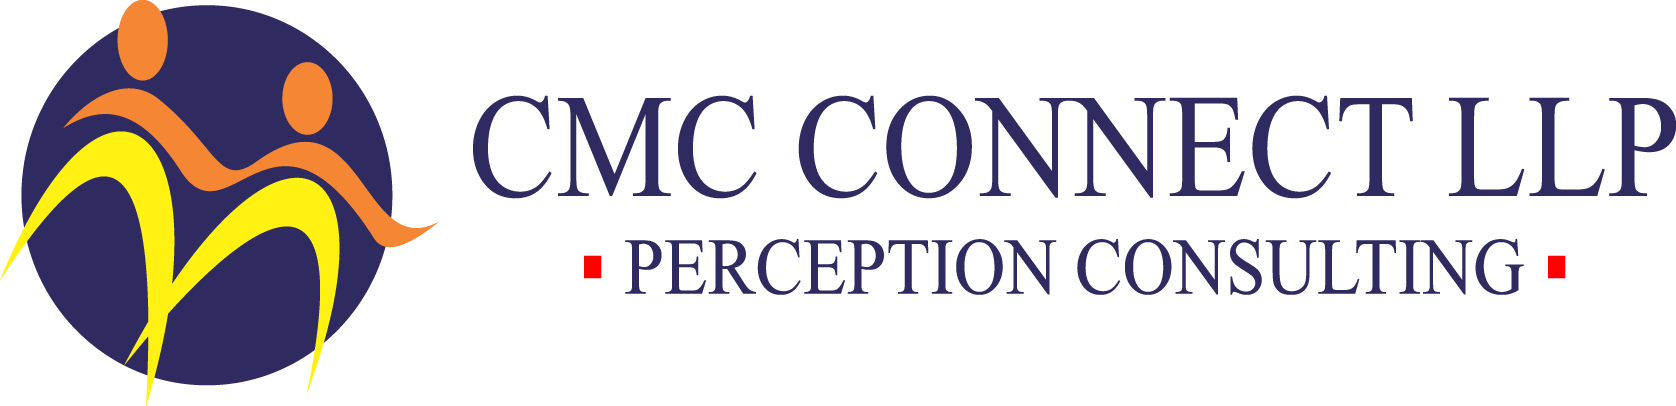 CMC Connect LLP